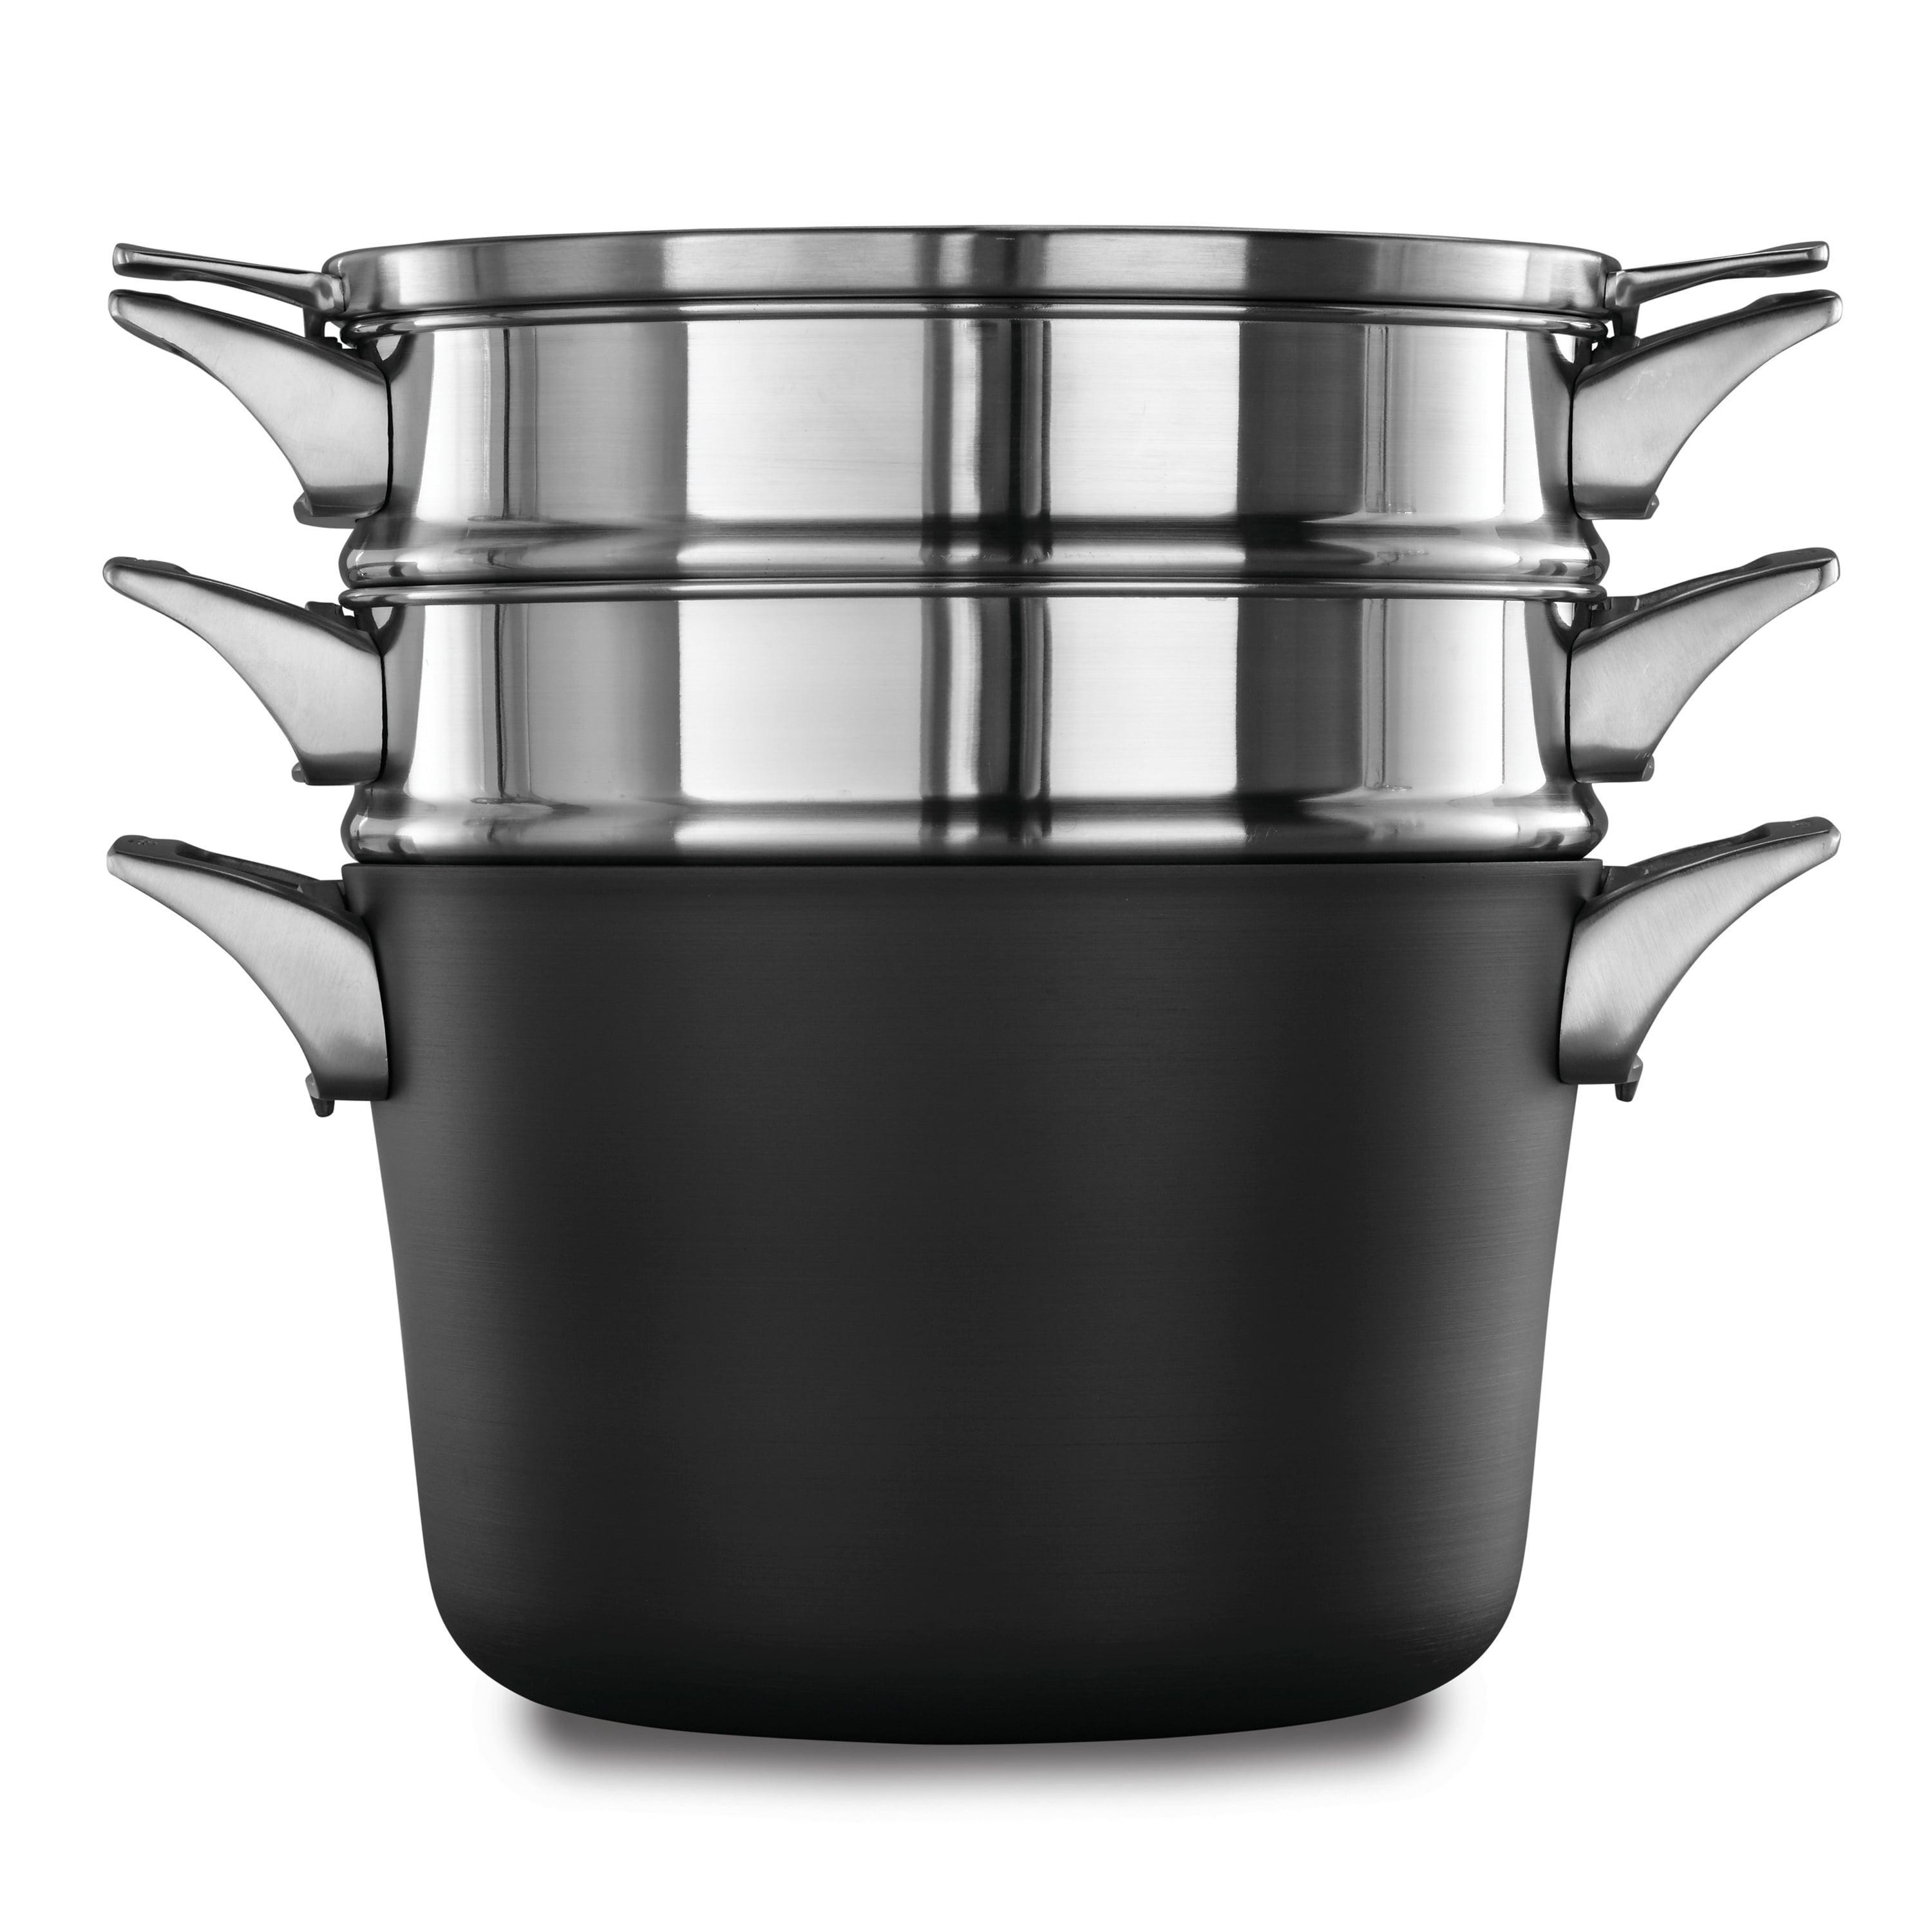 Aluminum 8-Quart Multi-Pot with Basket Insert and Tempered Glass Lid